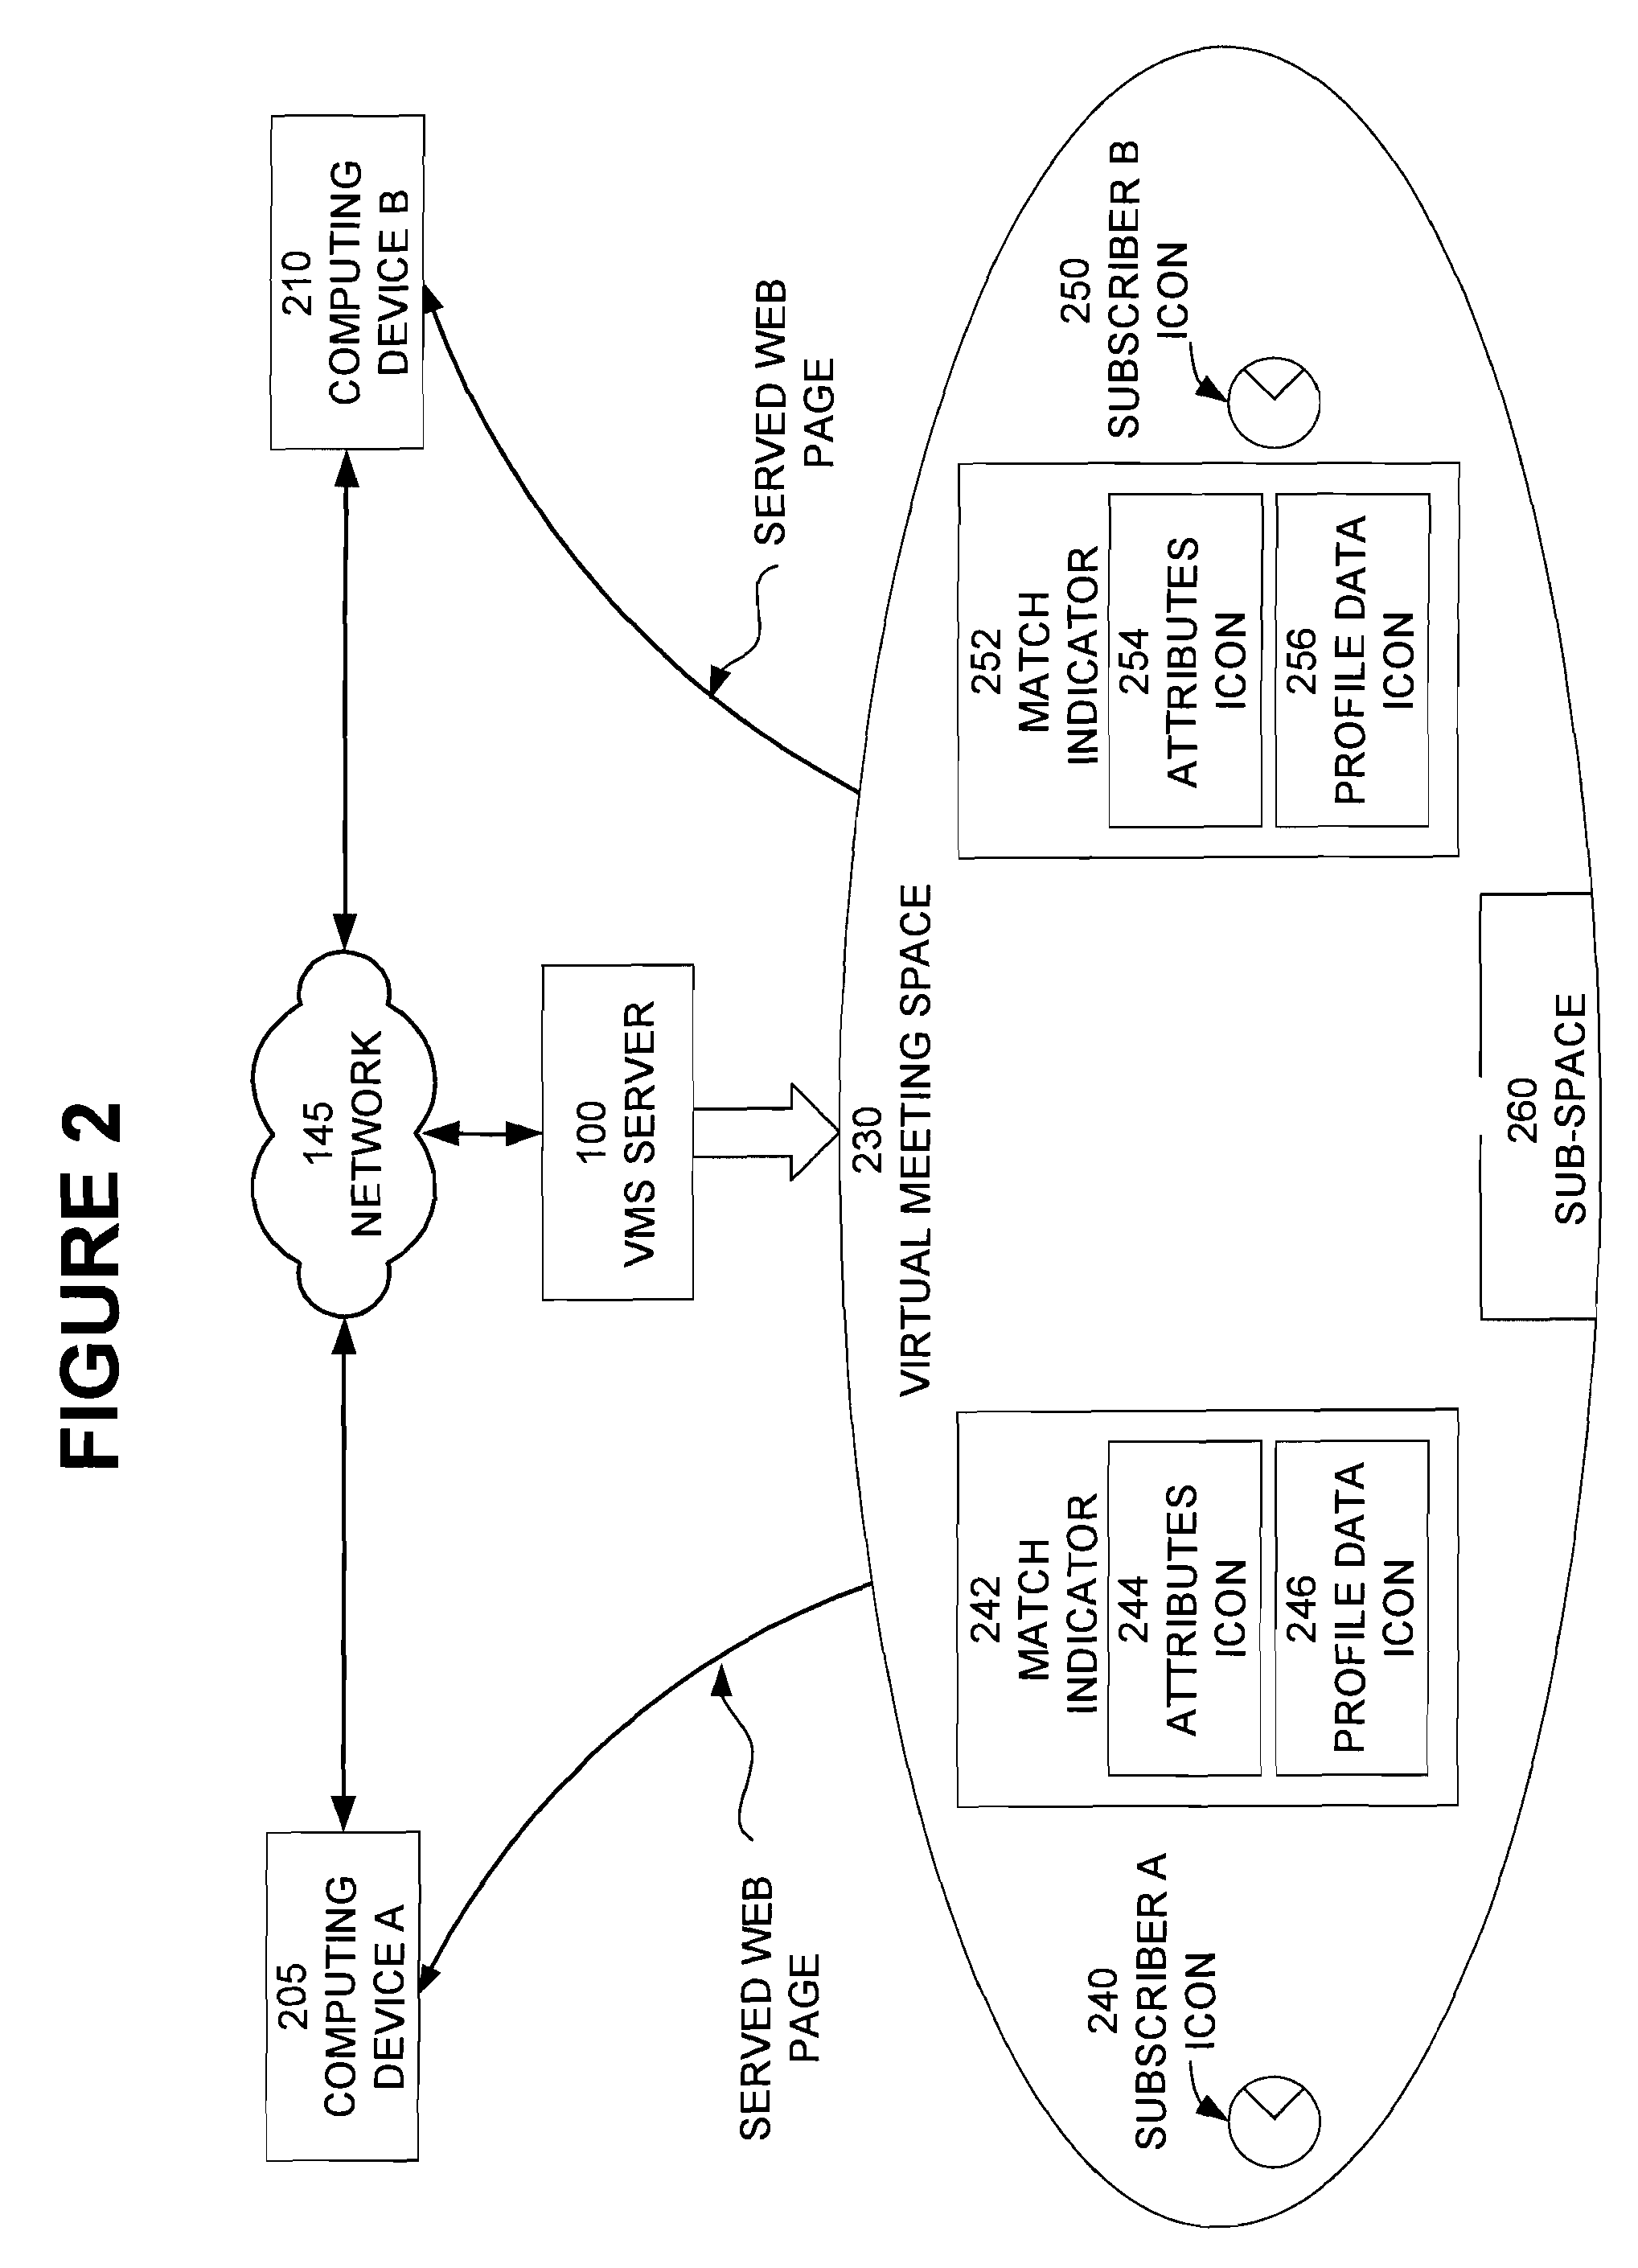 System and method for social networking in a virtual space